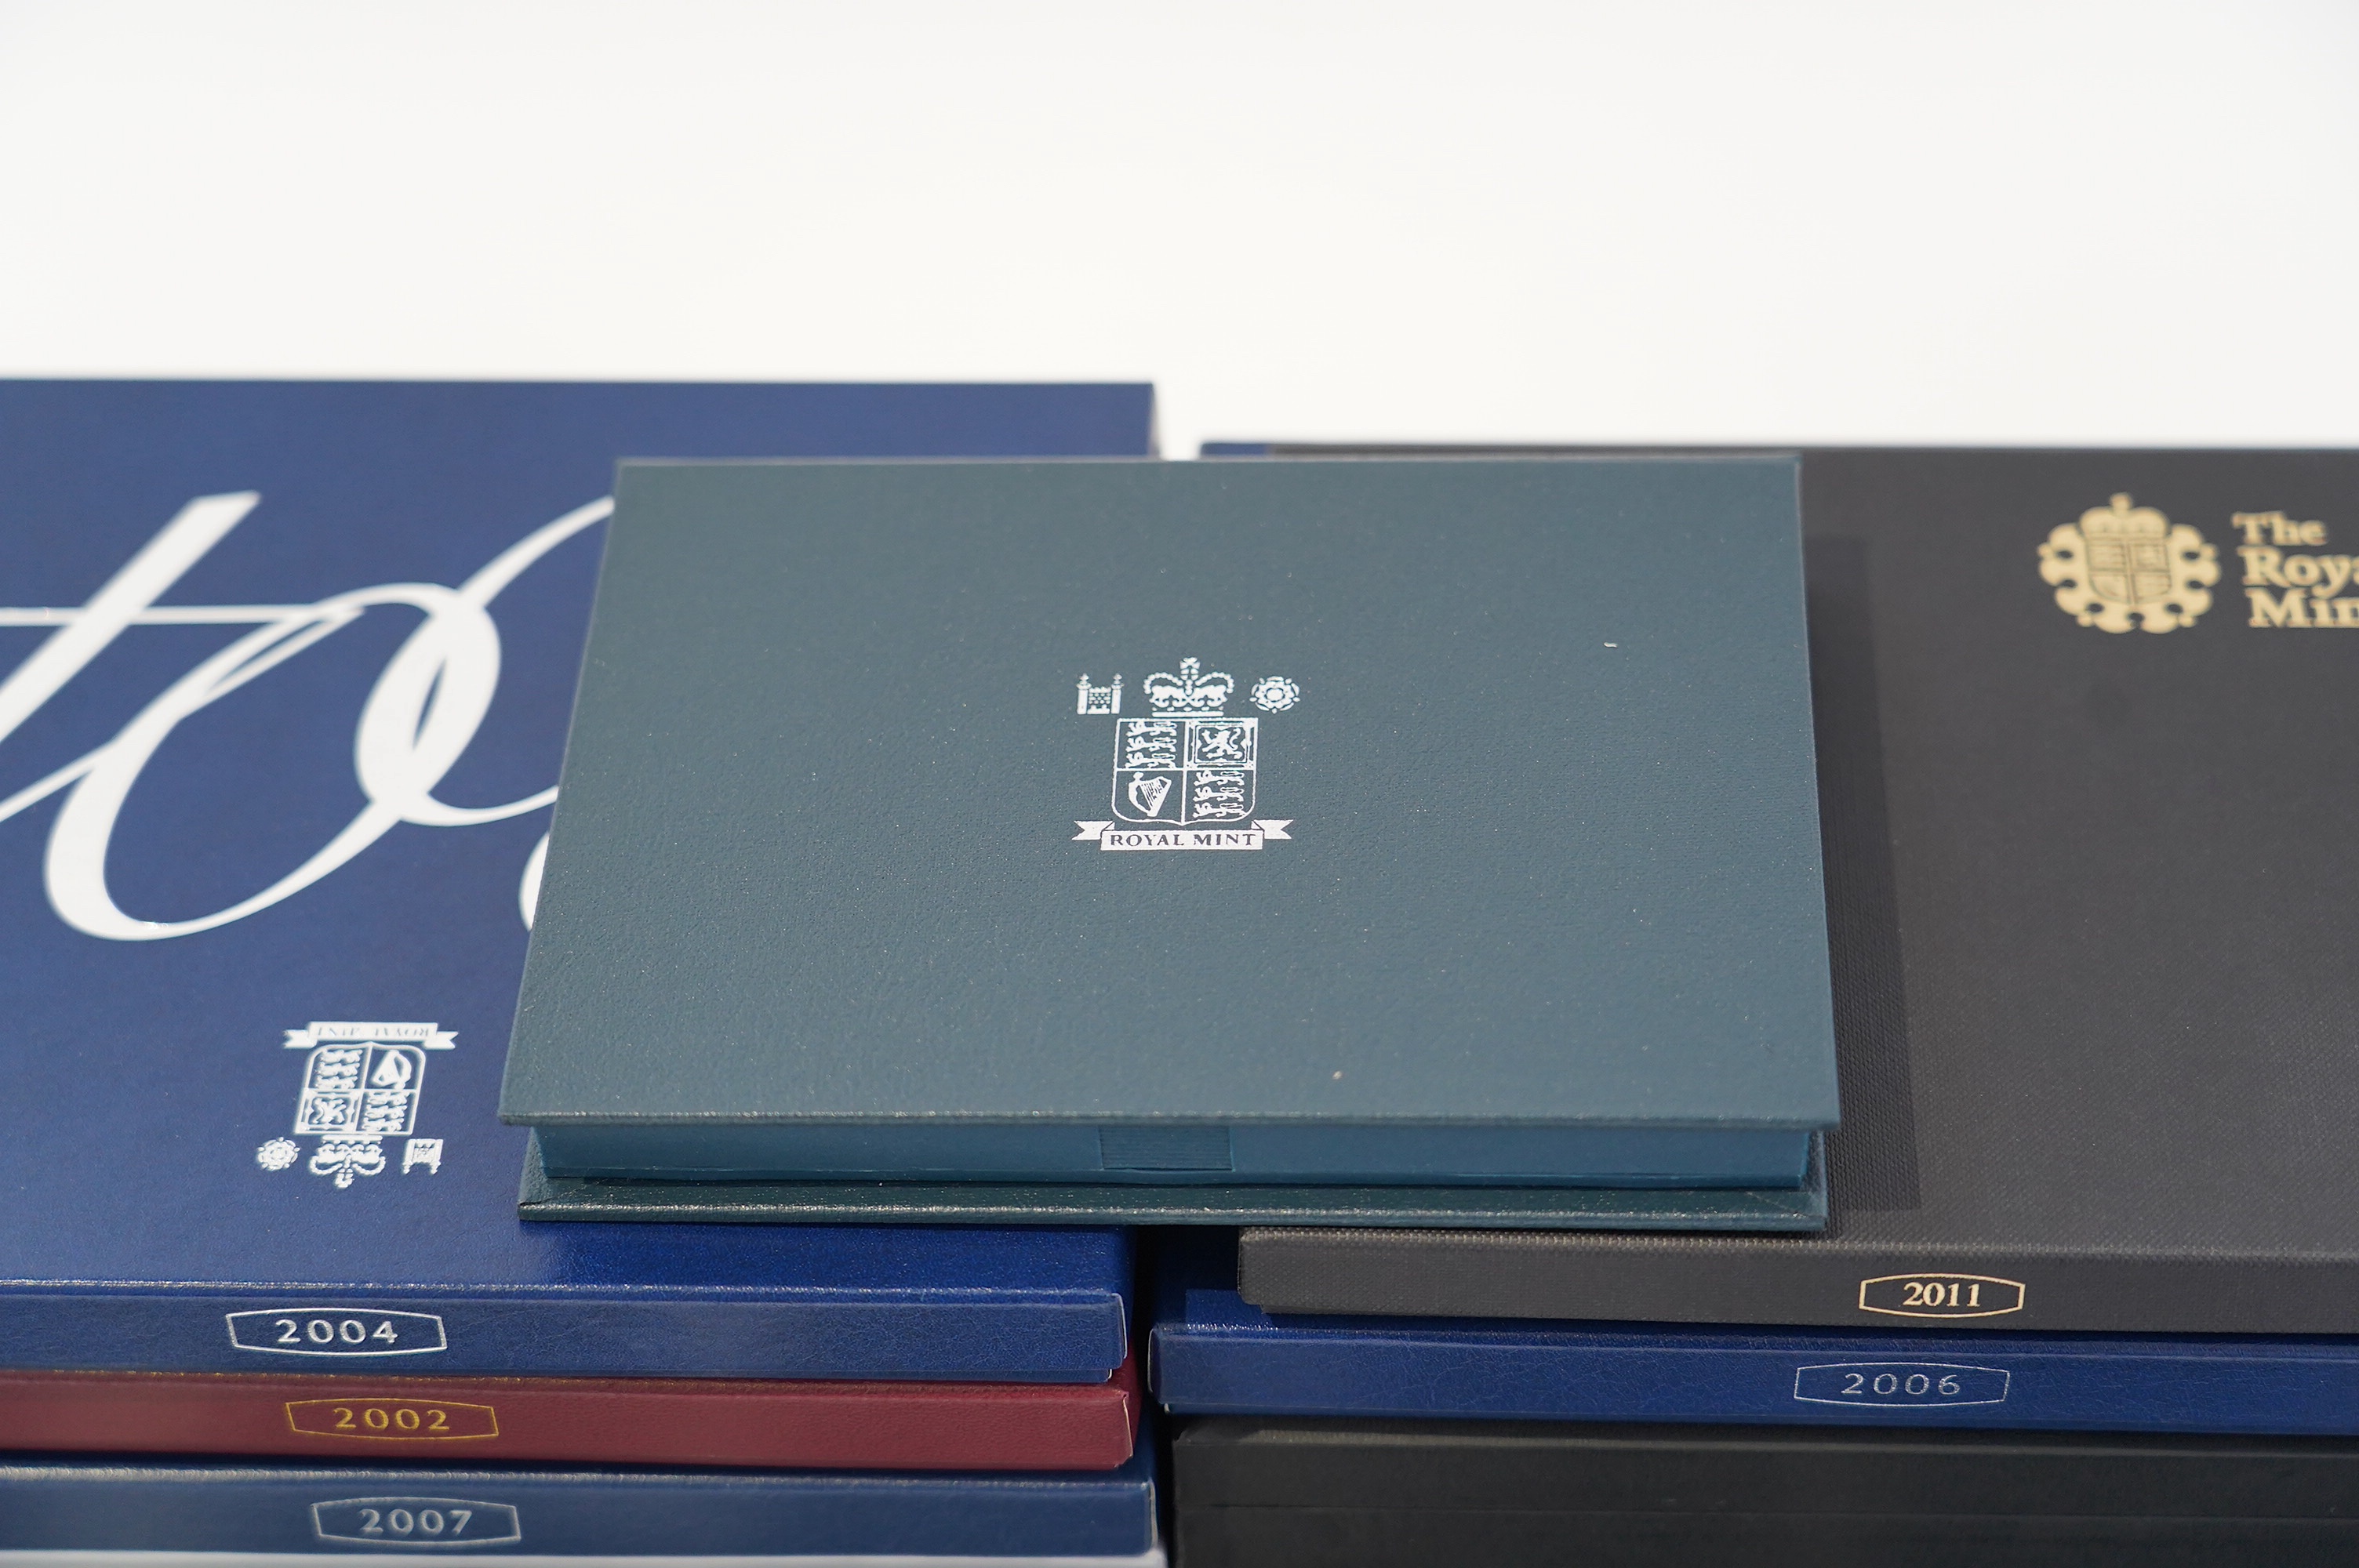 British proof coin year sets, Elizabeth II, sixteen cased sets covering the years 1996-2004, 2006-2008 and 2010-2013, each in case of issue with certificate